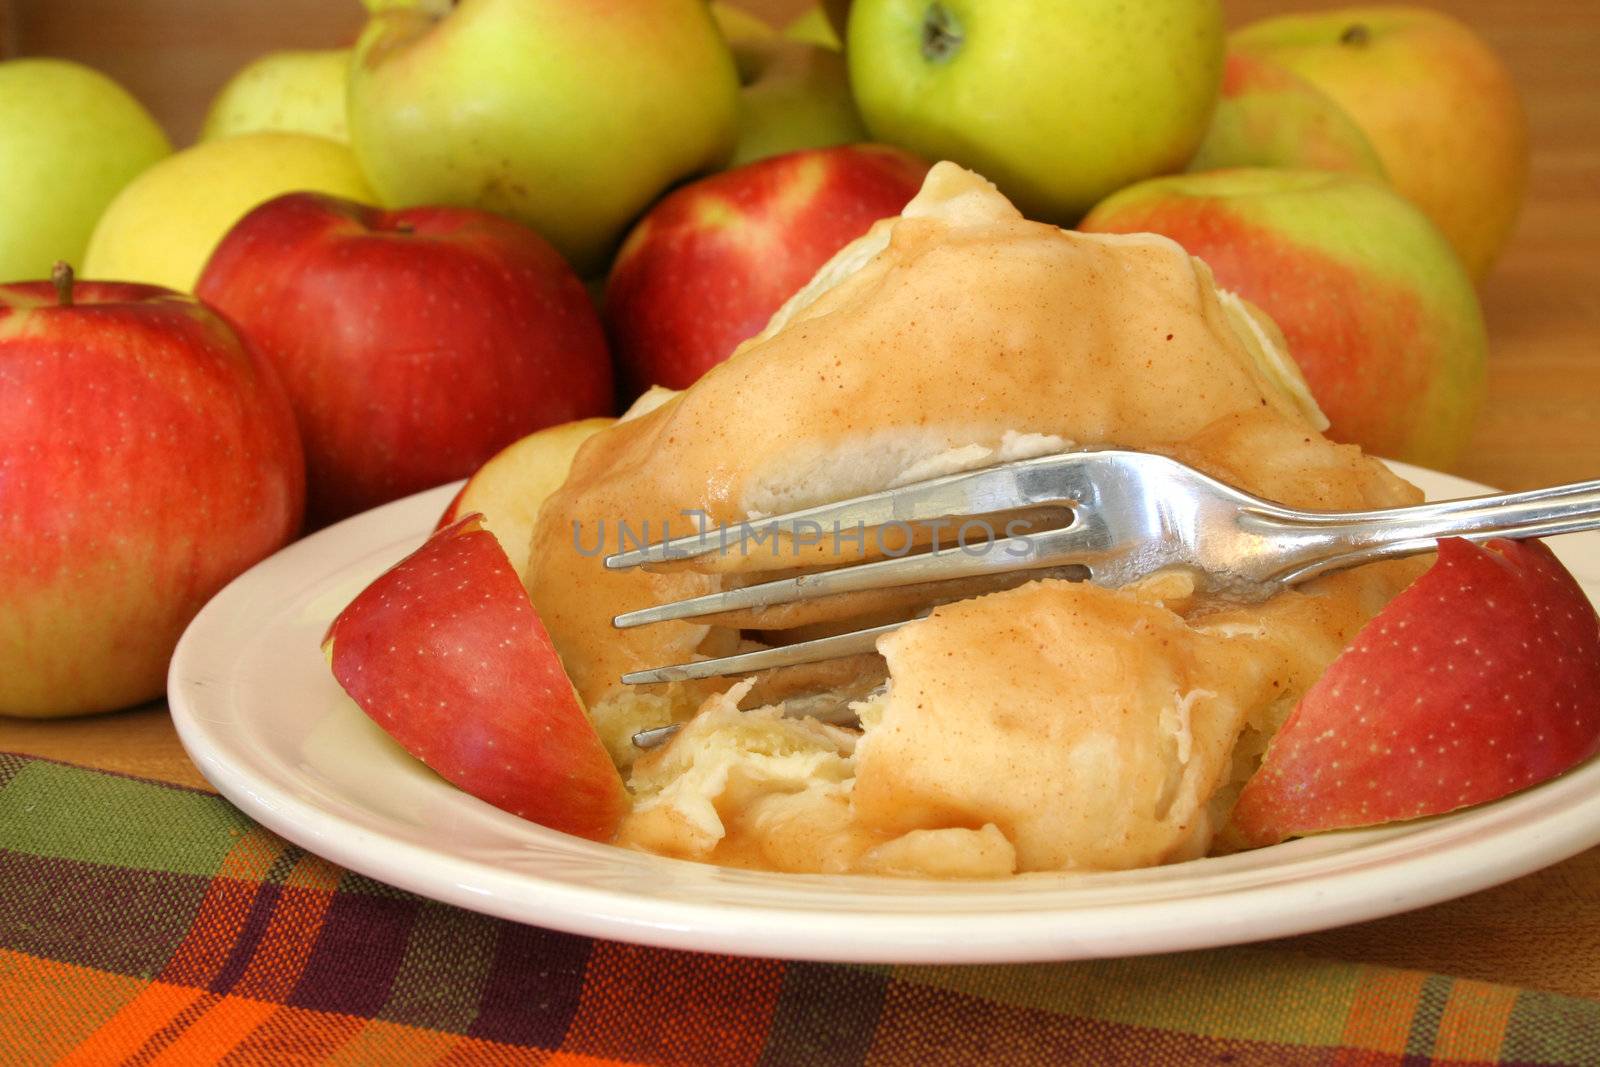 Home made apple dumpling with a group of apples in the background.

